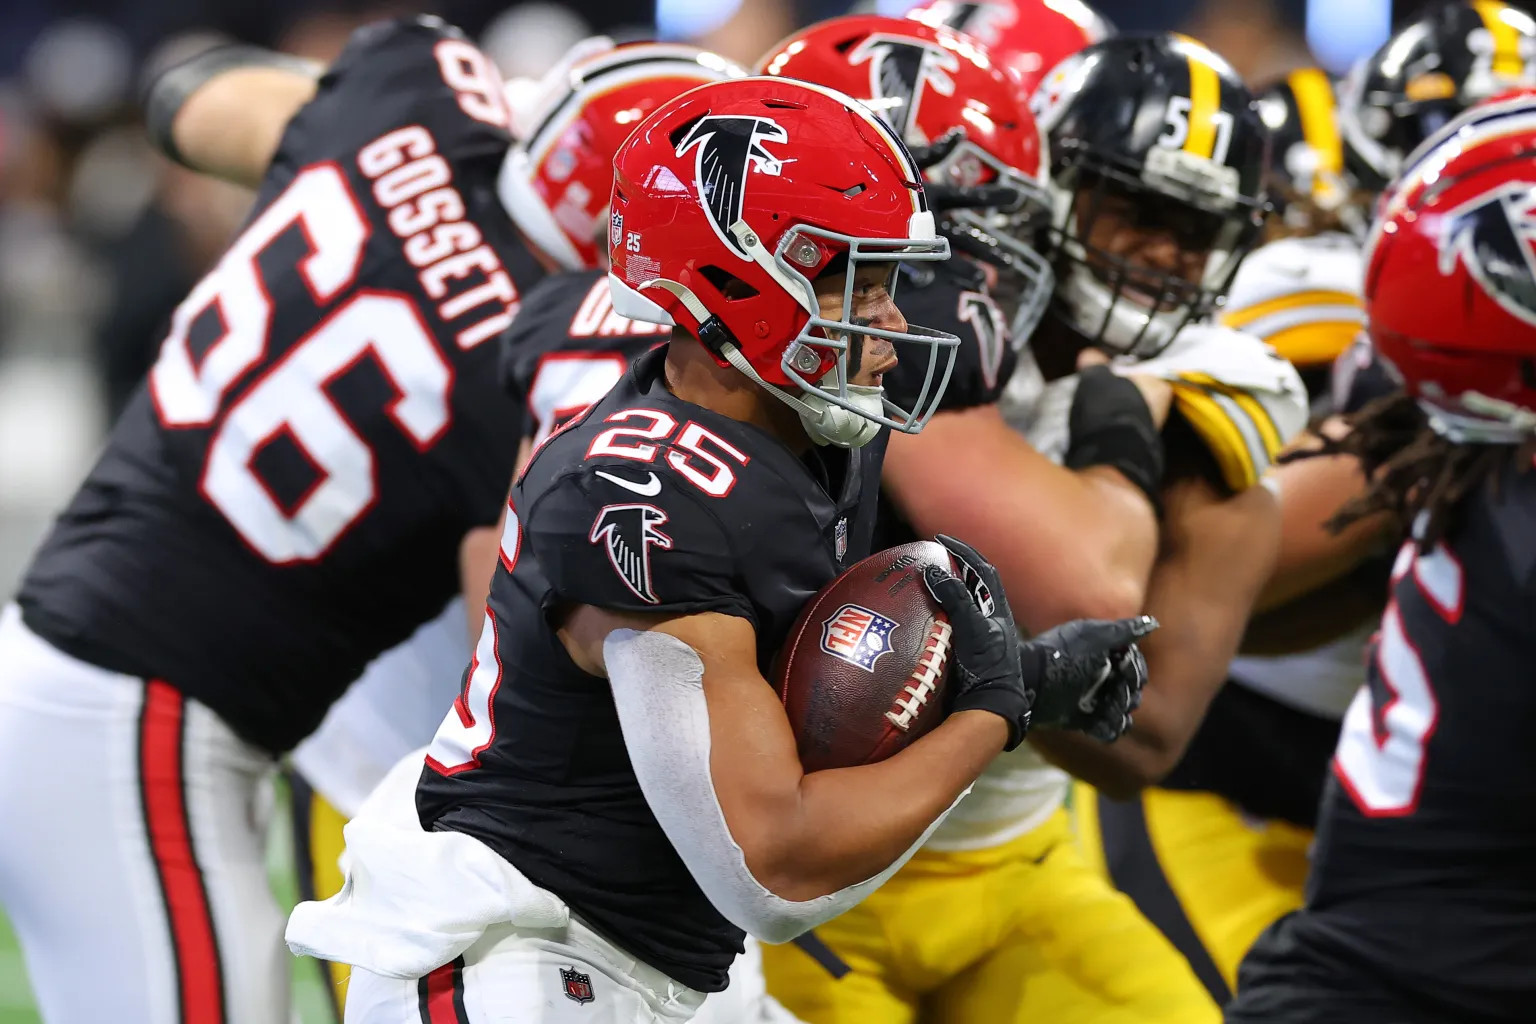 Steelers - Falcons: Final score, stats and highlights of preseason